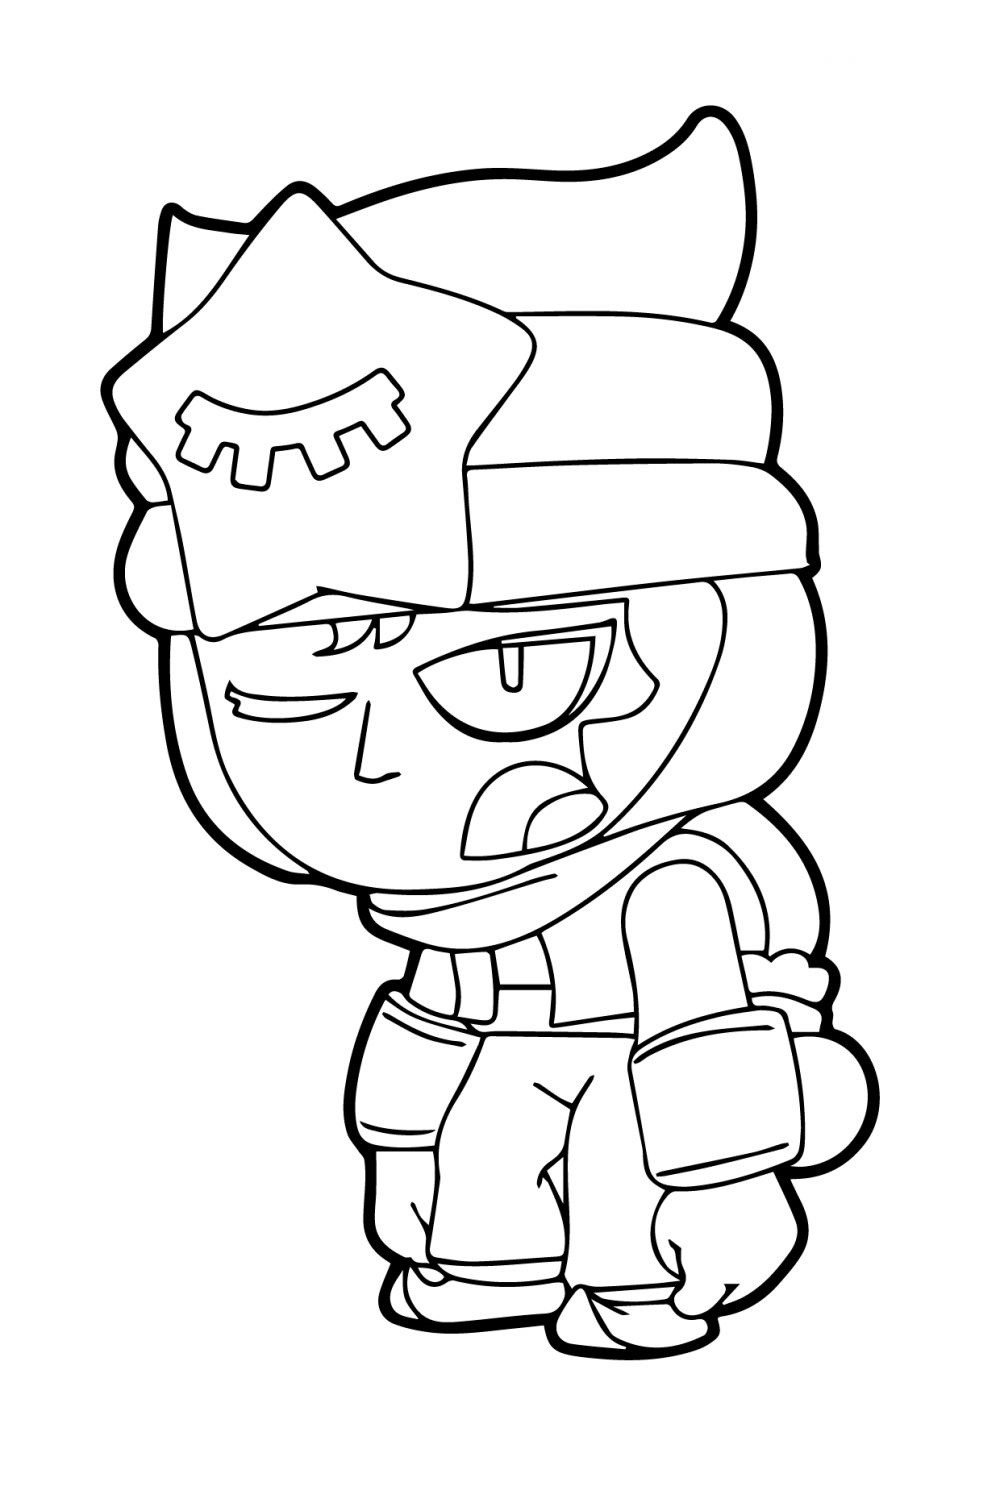 Sandy Coloring Pages Print Brawl Stars Character For Free - el primo brawl stars a colorier